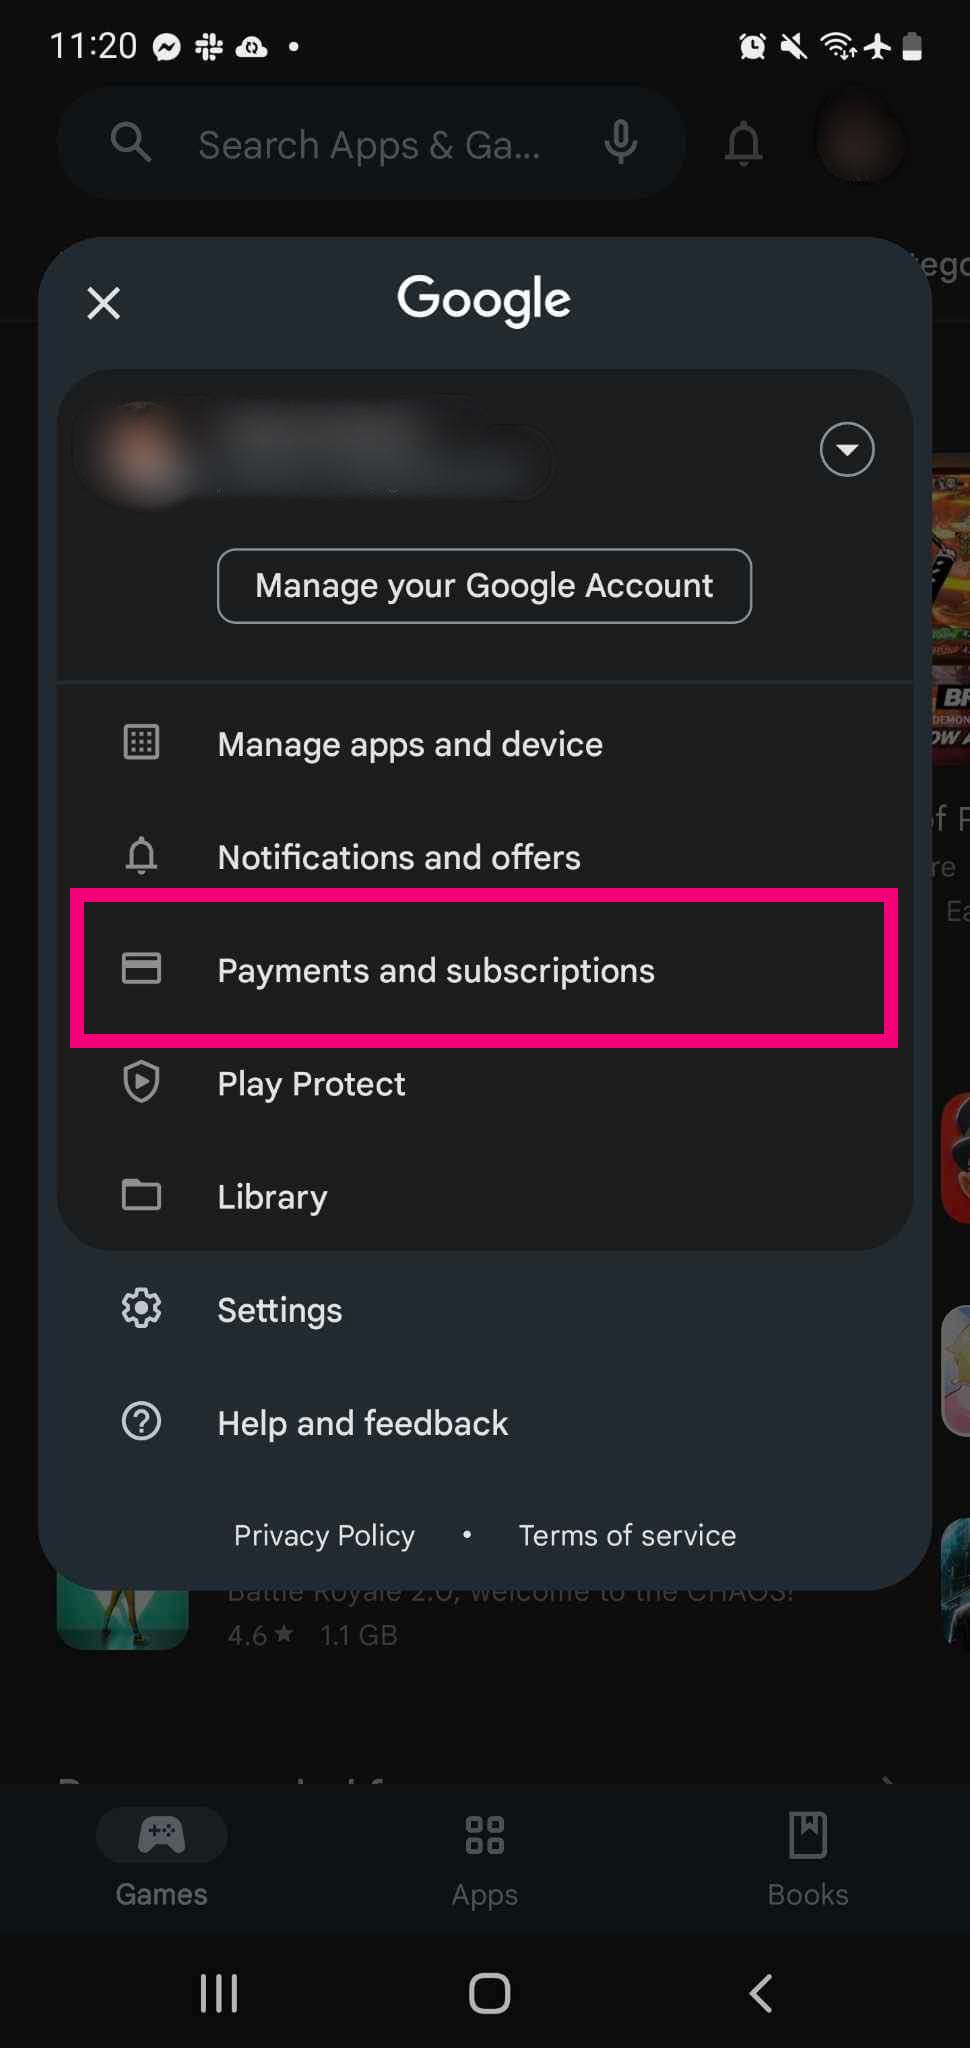 Payments and subscriptions on Google PlayStore